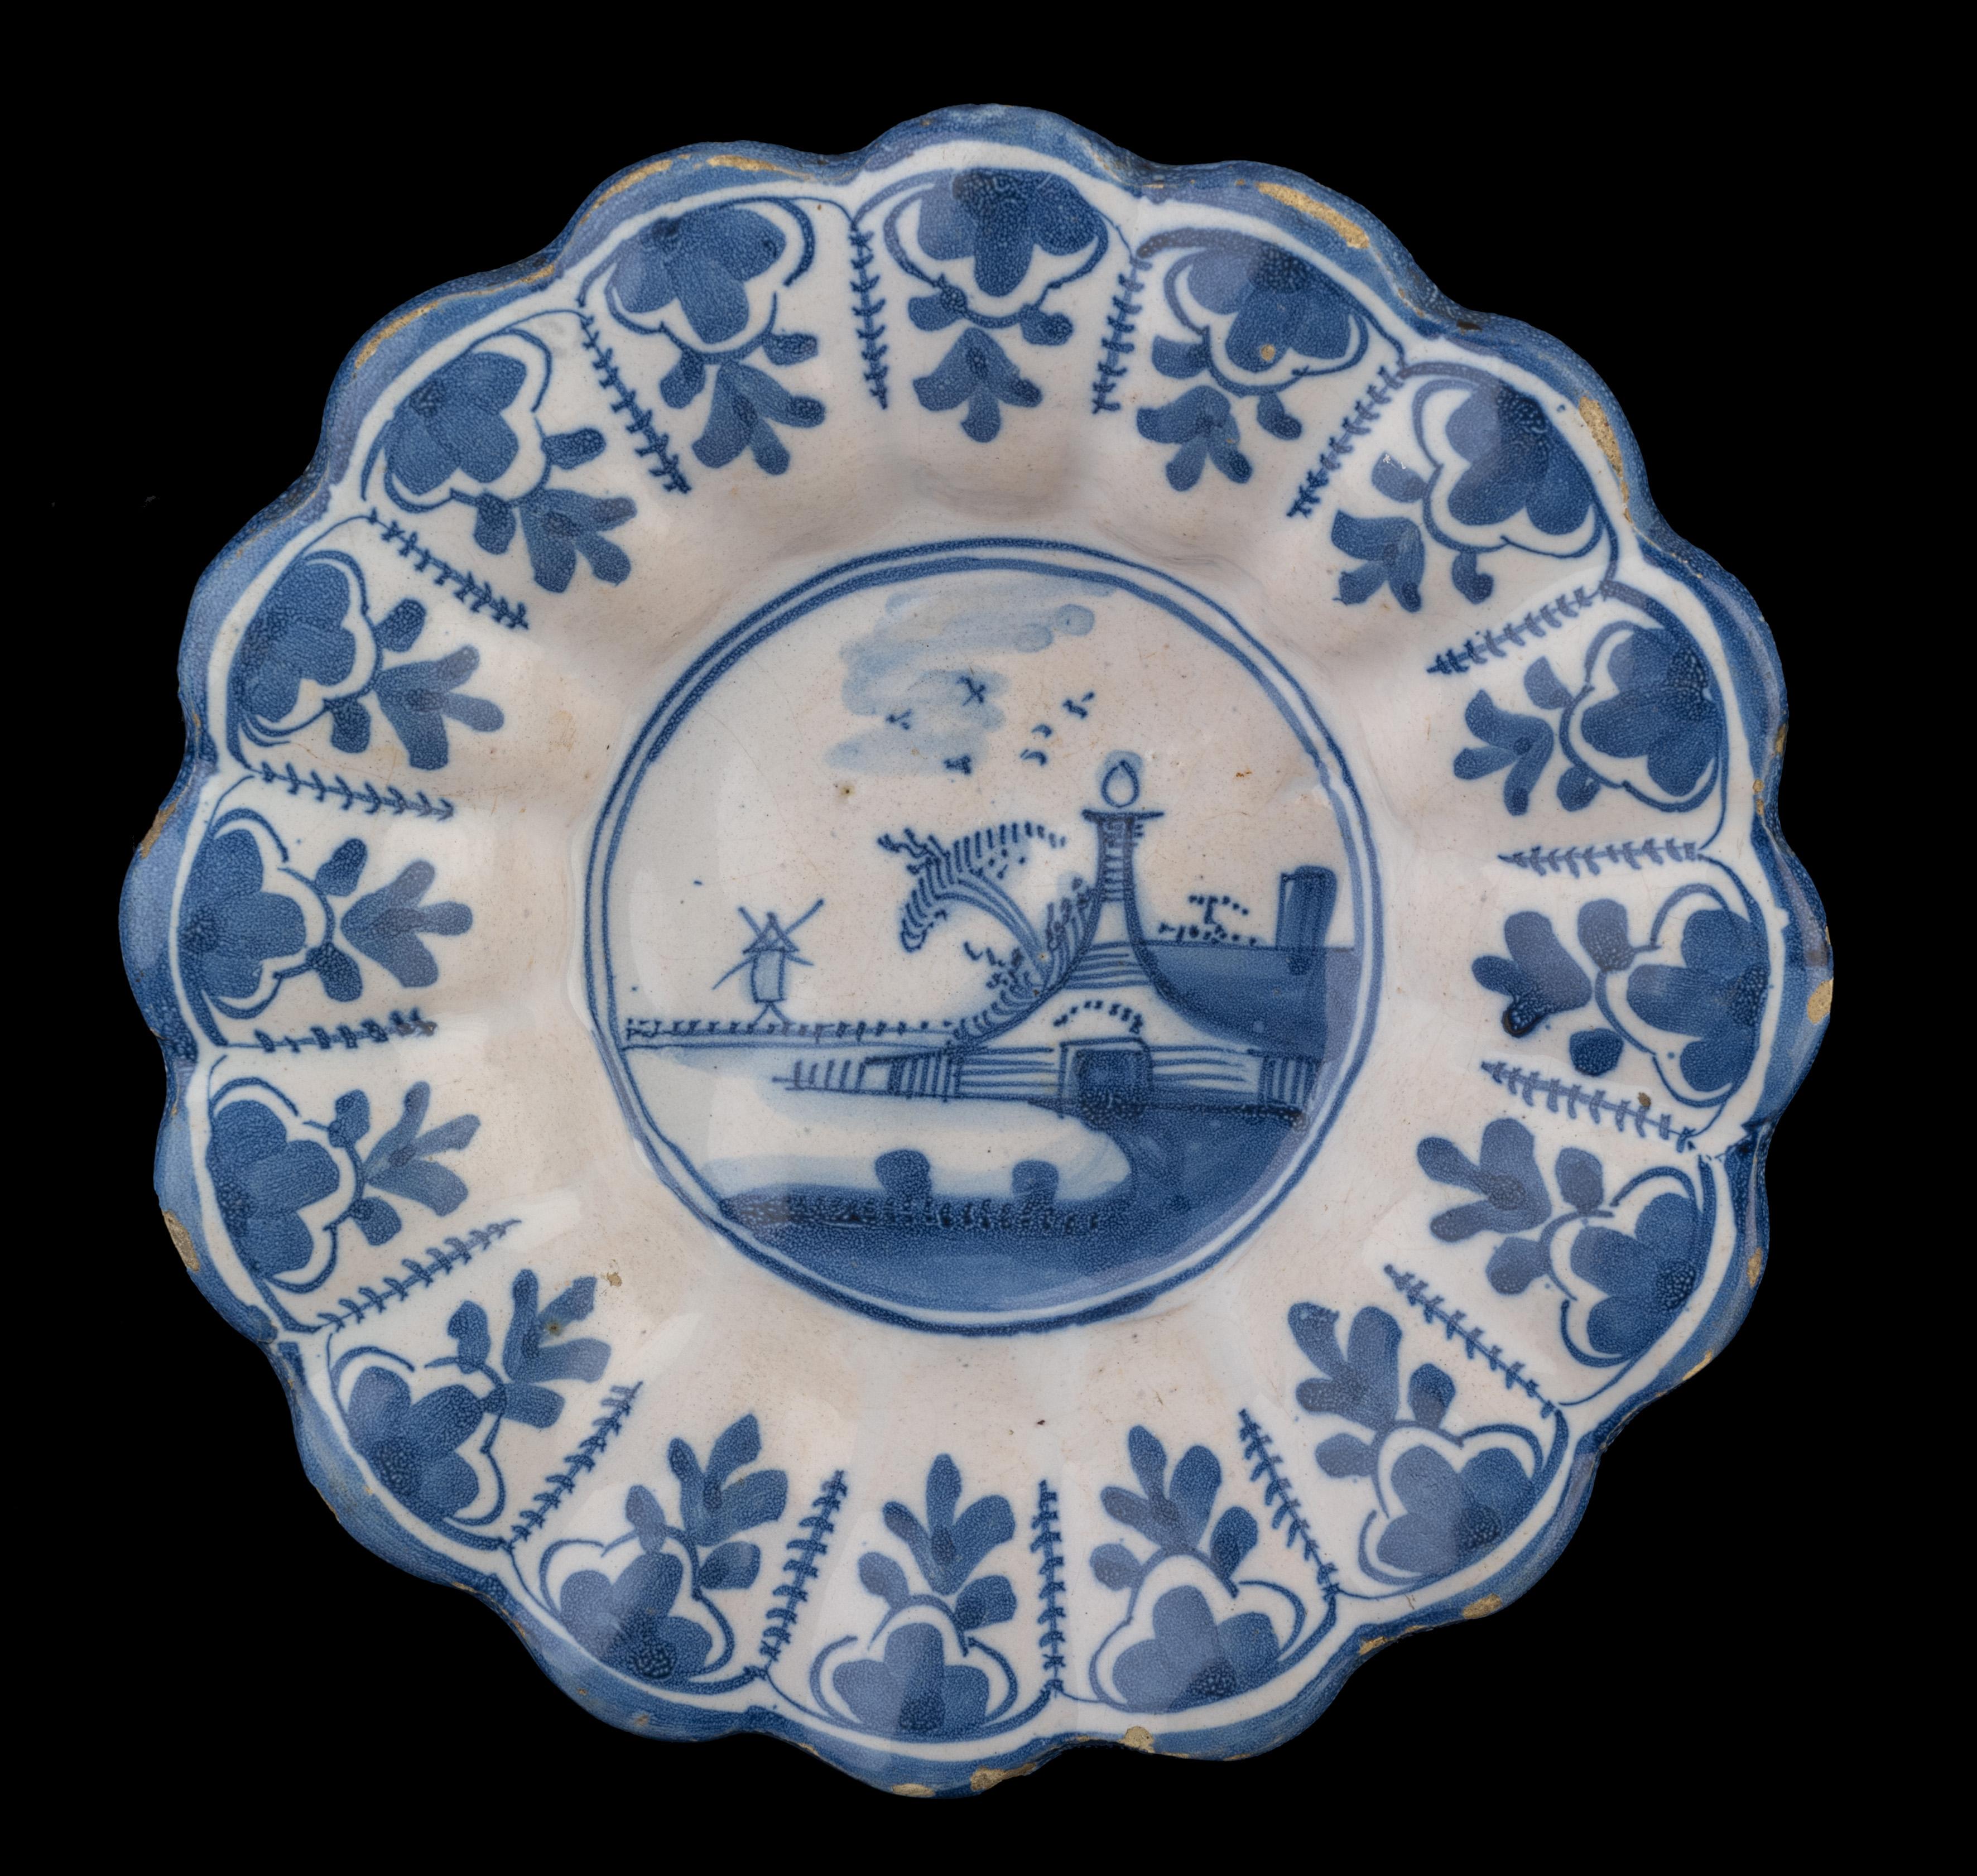 Blue and white lobed dish with landscape. Northern Netherlands, 1650-1680.
Dimensions: diameter 21,5 cm / 8.46 in.

The blue and white lobed dish is composed of sixteen small lobes and is painted in the centre with a landscape. In the background